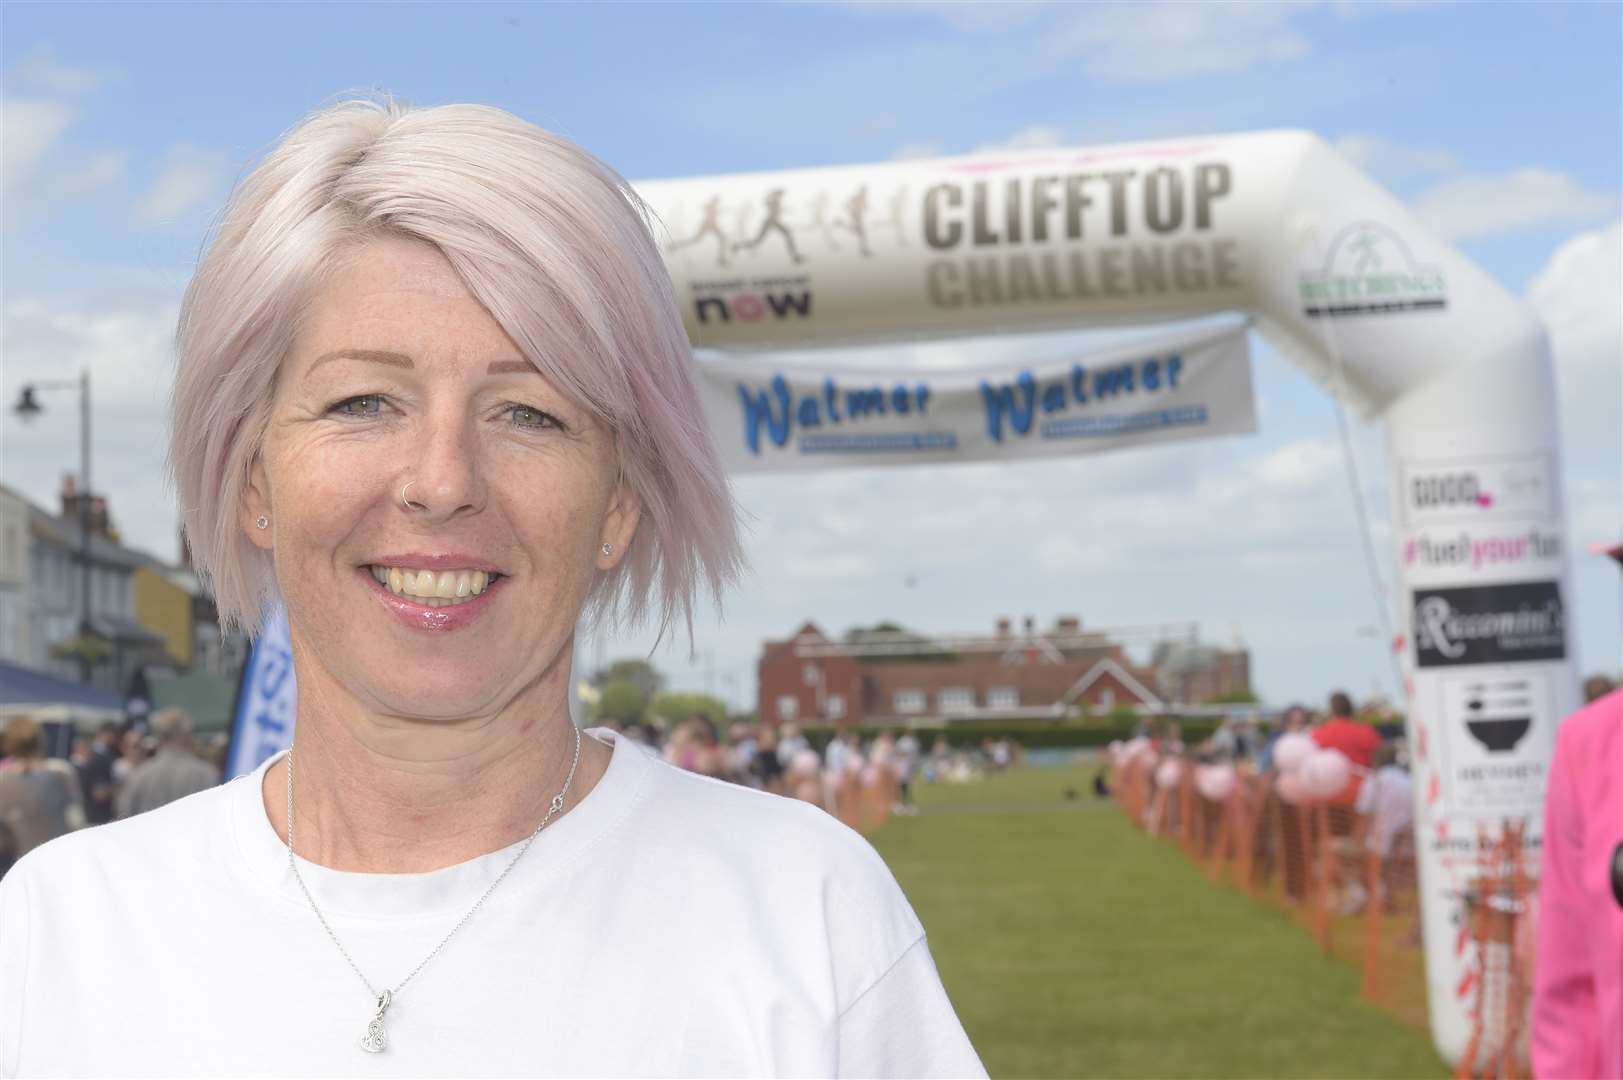 The annual Clifftop Challenge organised by Chantele Rashbrook returns Picture: Tony Flashman